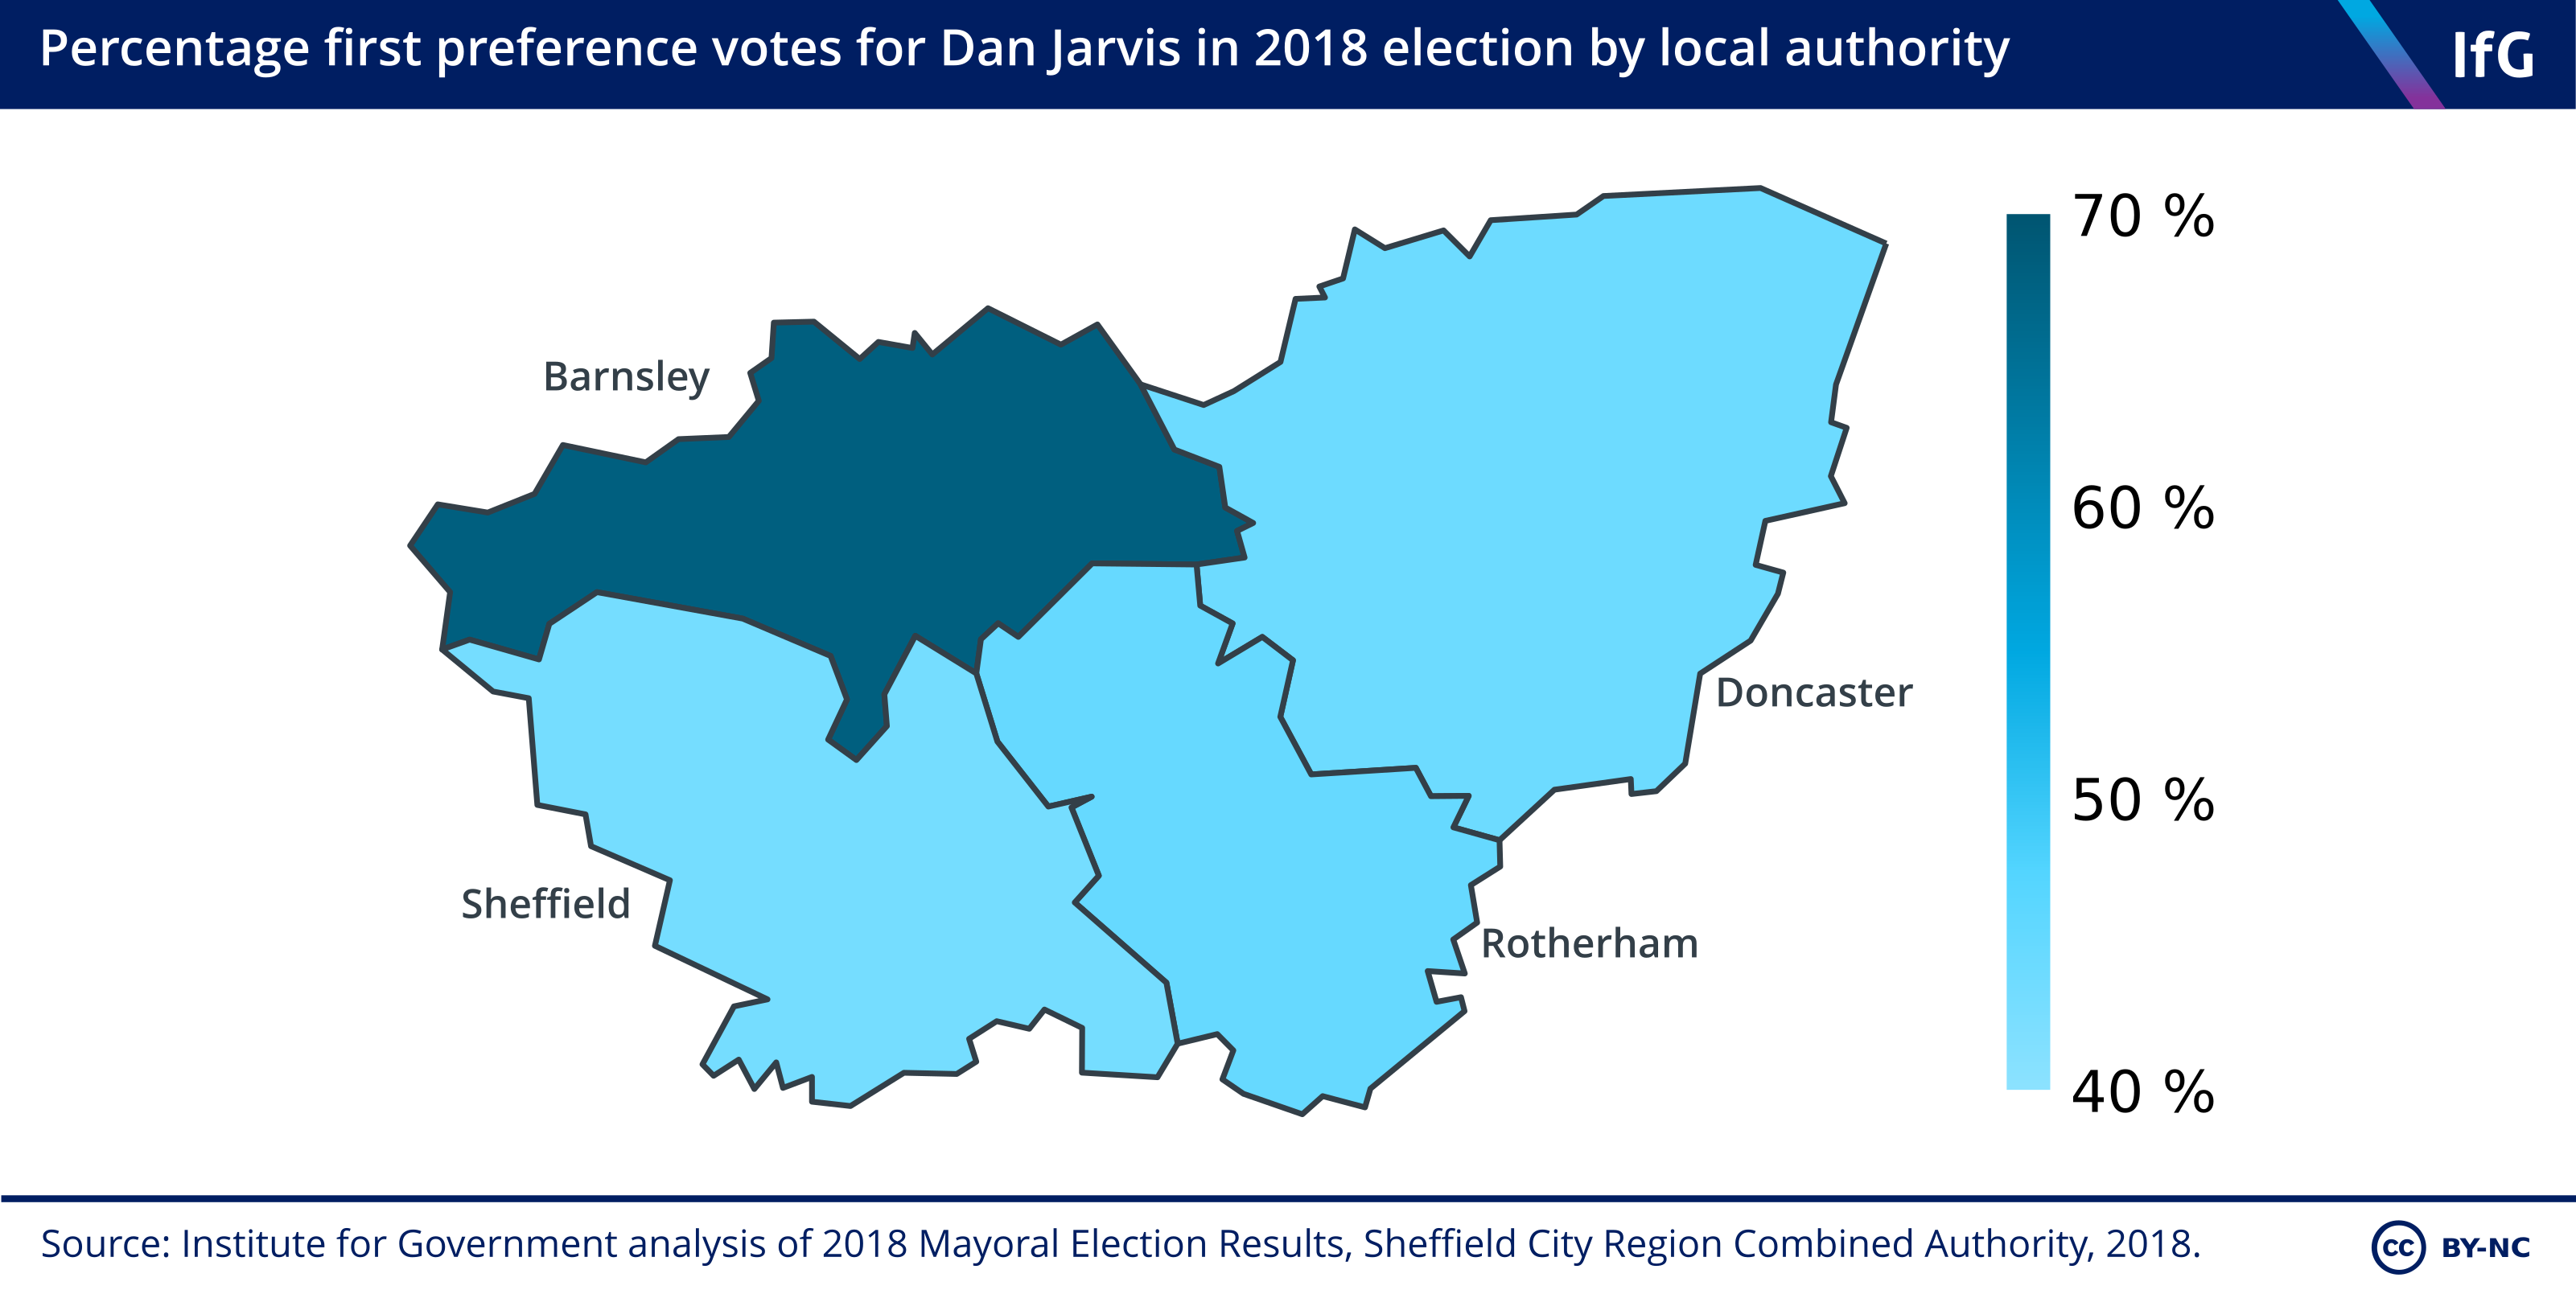 Percentage first preference votes for Dan Jarvis in 2018 election by local authority